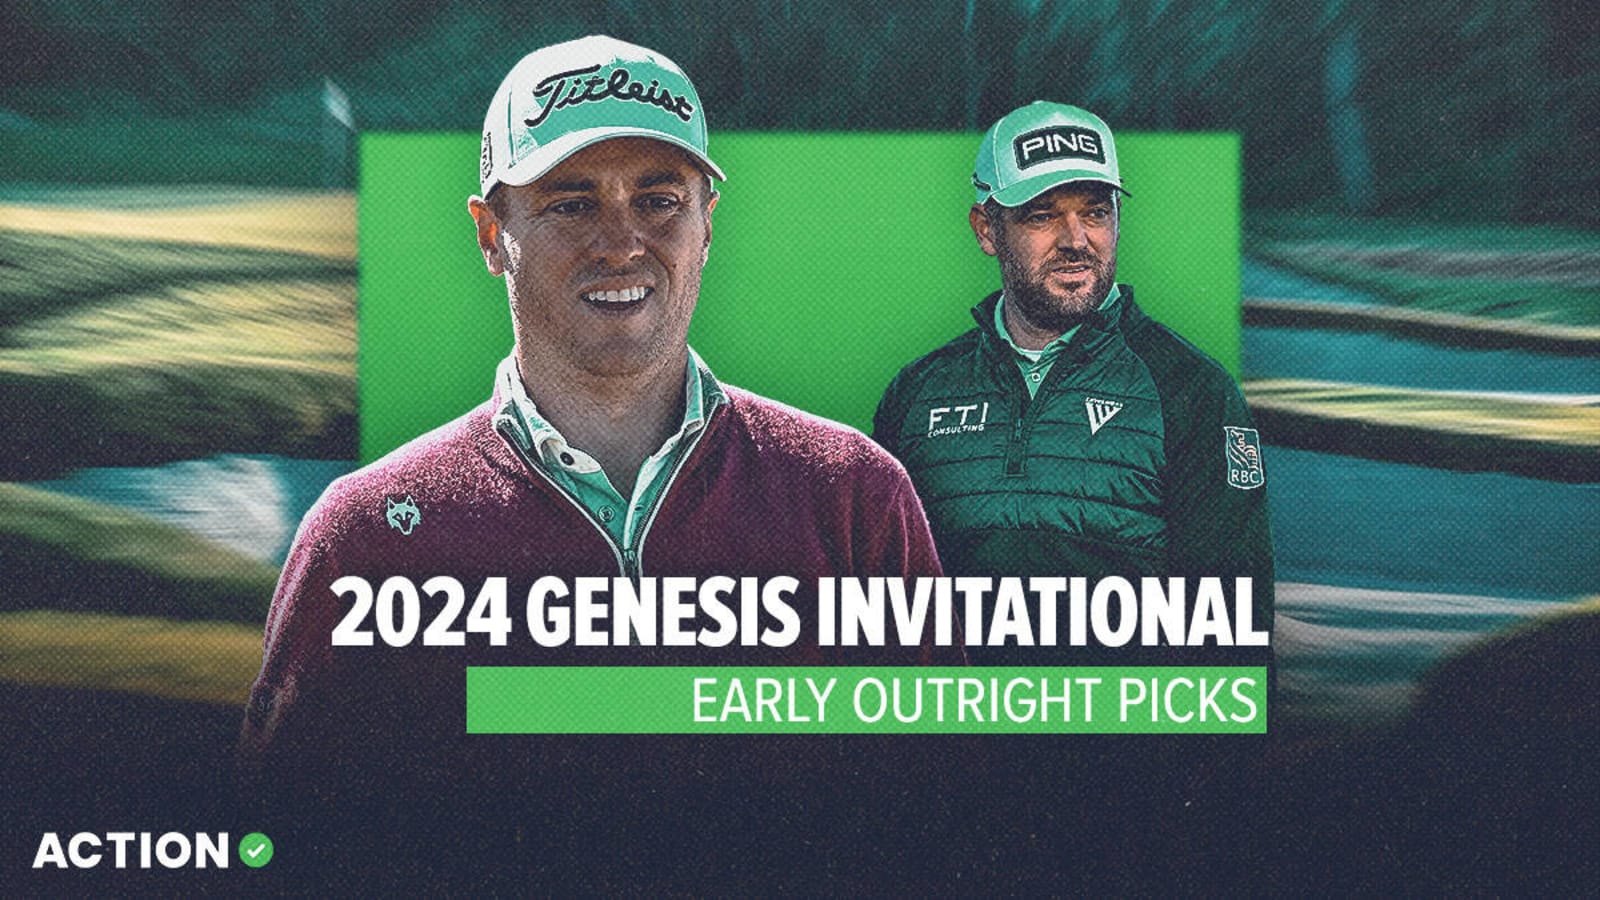 2024 Genesis Invitational early outright bets: Justin Thomas, Corey Conners and more